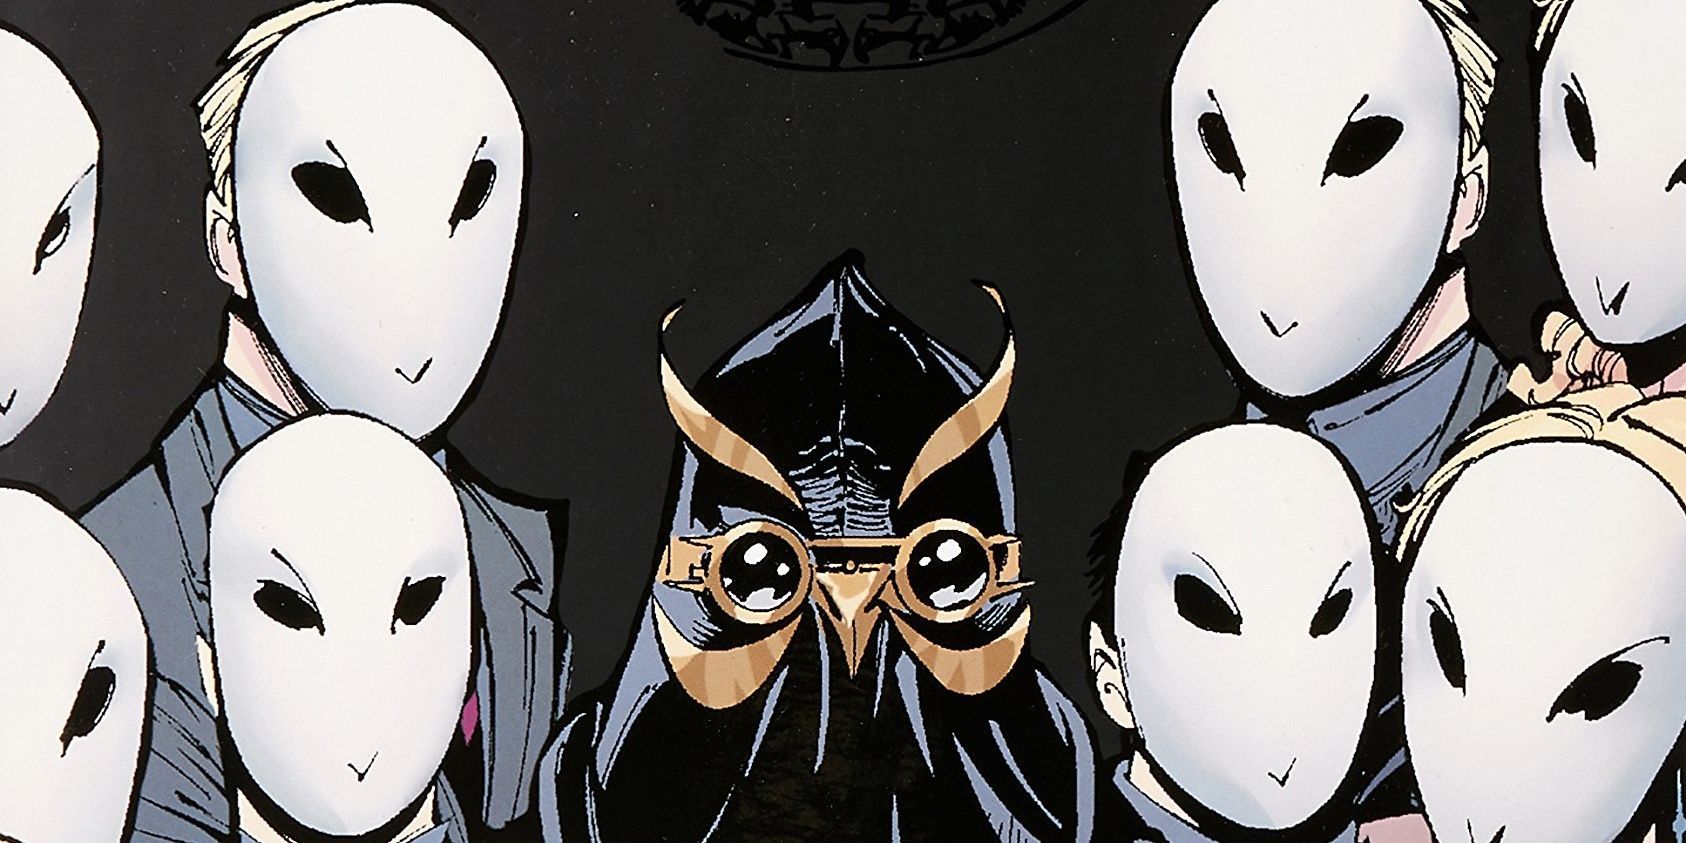 The Court Of Owls in The Batman comics